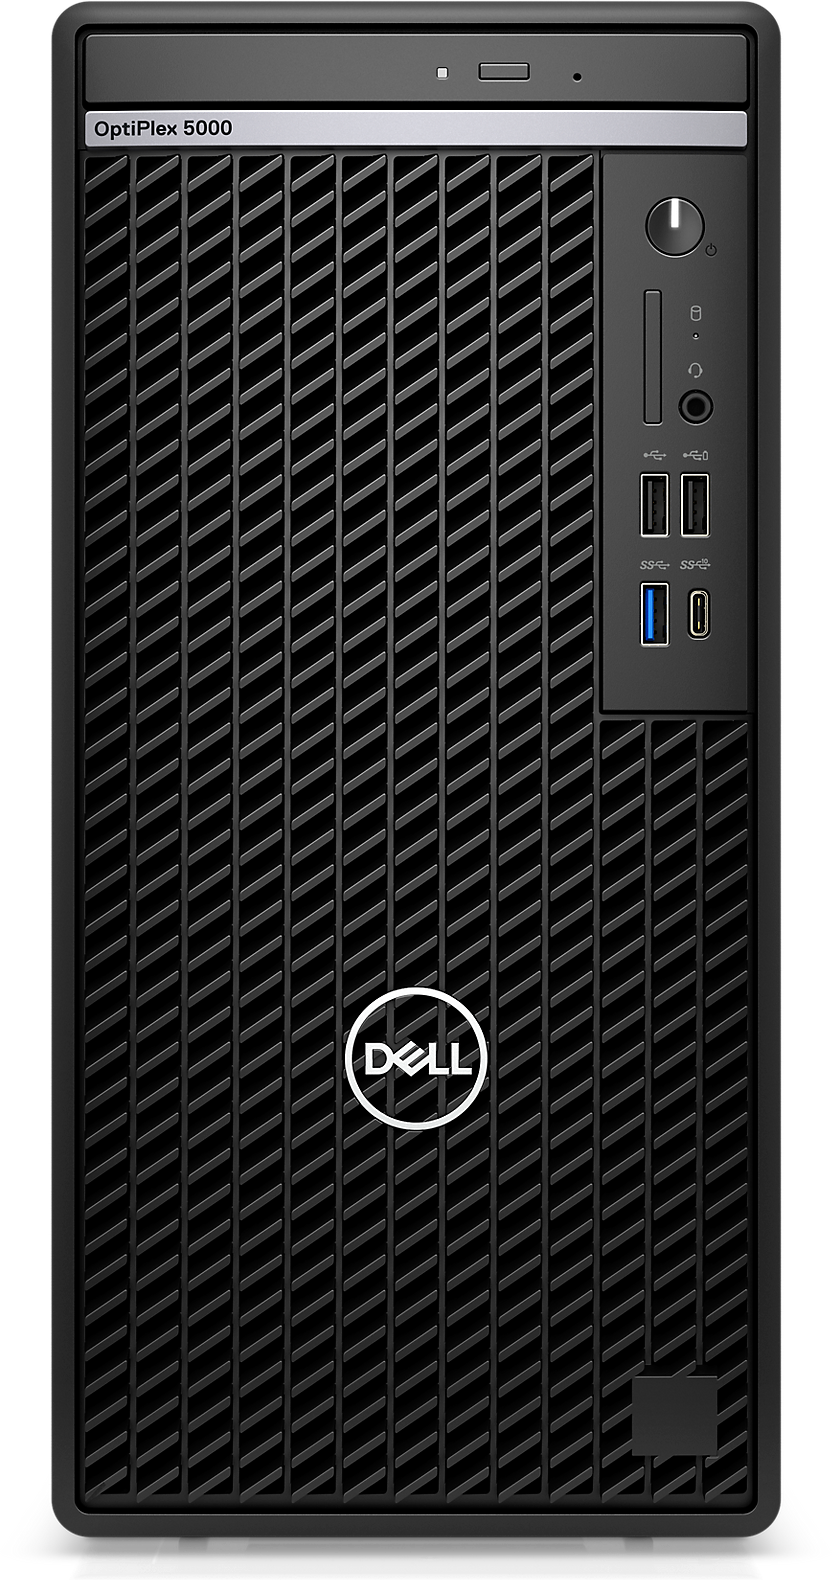 https://i.dell.com/is/image/DellContent/content/dam/ss2/products/desktops-and-all-in-ones/optiplex/5000-tsff/media-gallery/optiplex-5000t-gallery-4.psd?wid=1920&hei=1580&fmt=png-alpha&qlt=90%2c0&op_usm=1.75%2c0.3%2c2%2c0&resMode=sharp&pscan=auto&fit=constrain%2c1&align=0%2c0